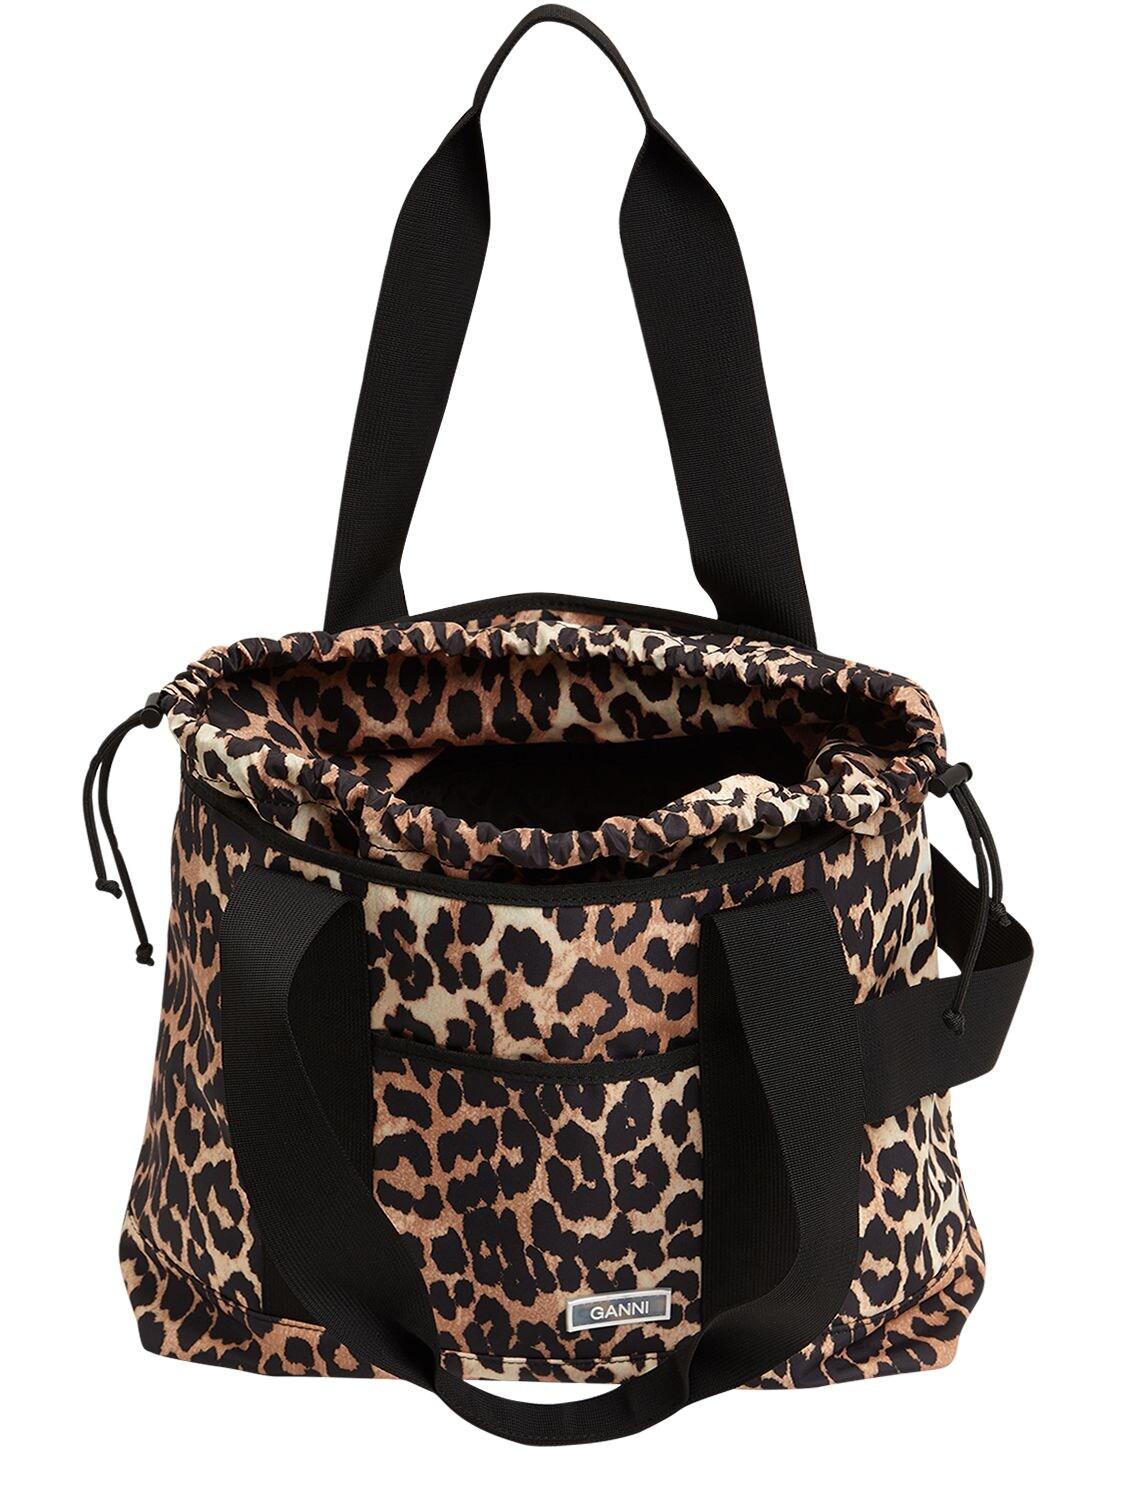 Ganni Rubber Recycled Tech Drawstring Bag Leopard One Size in 